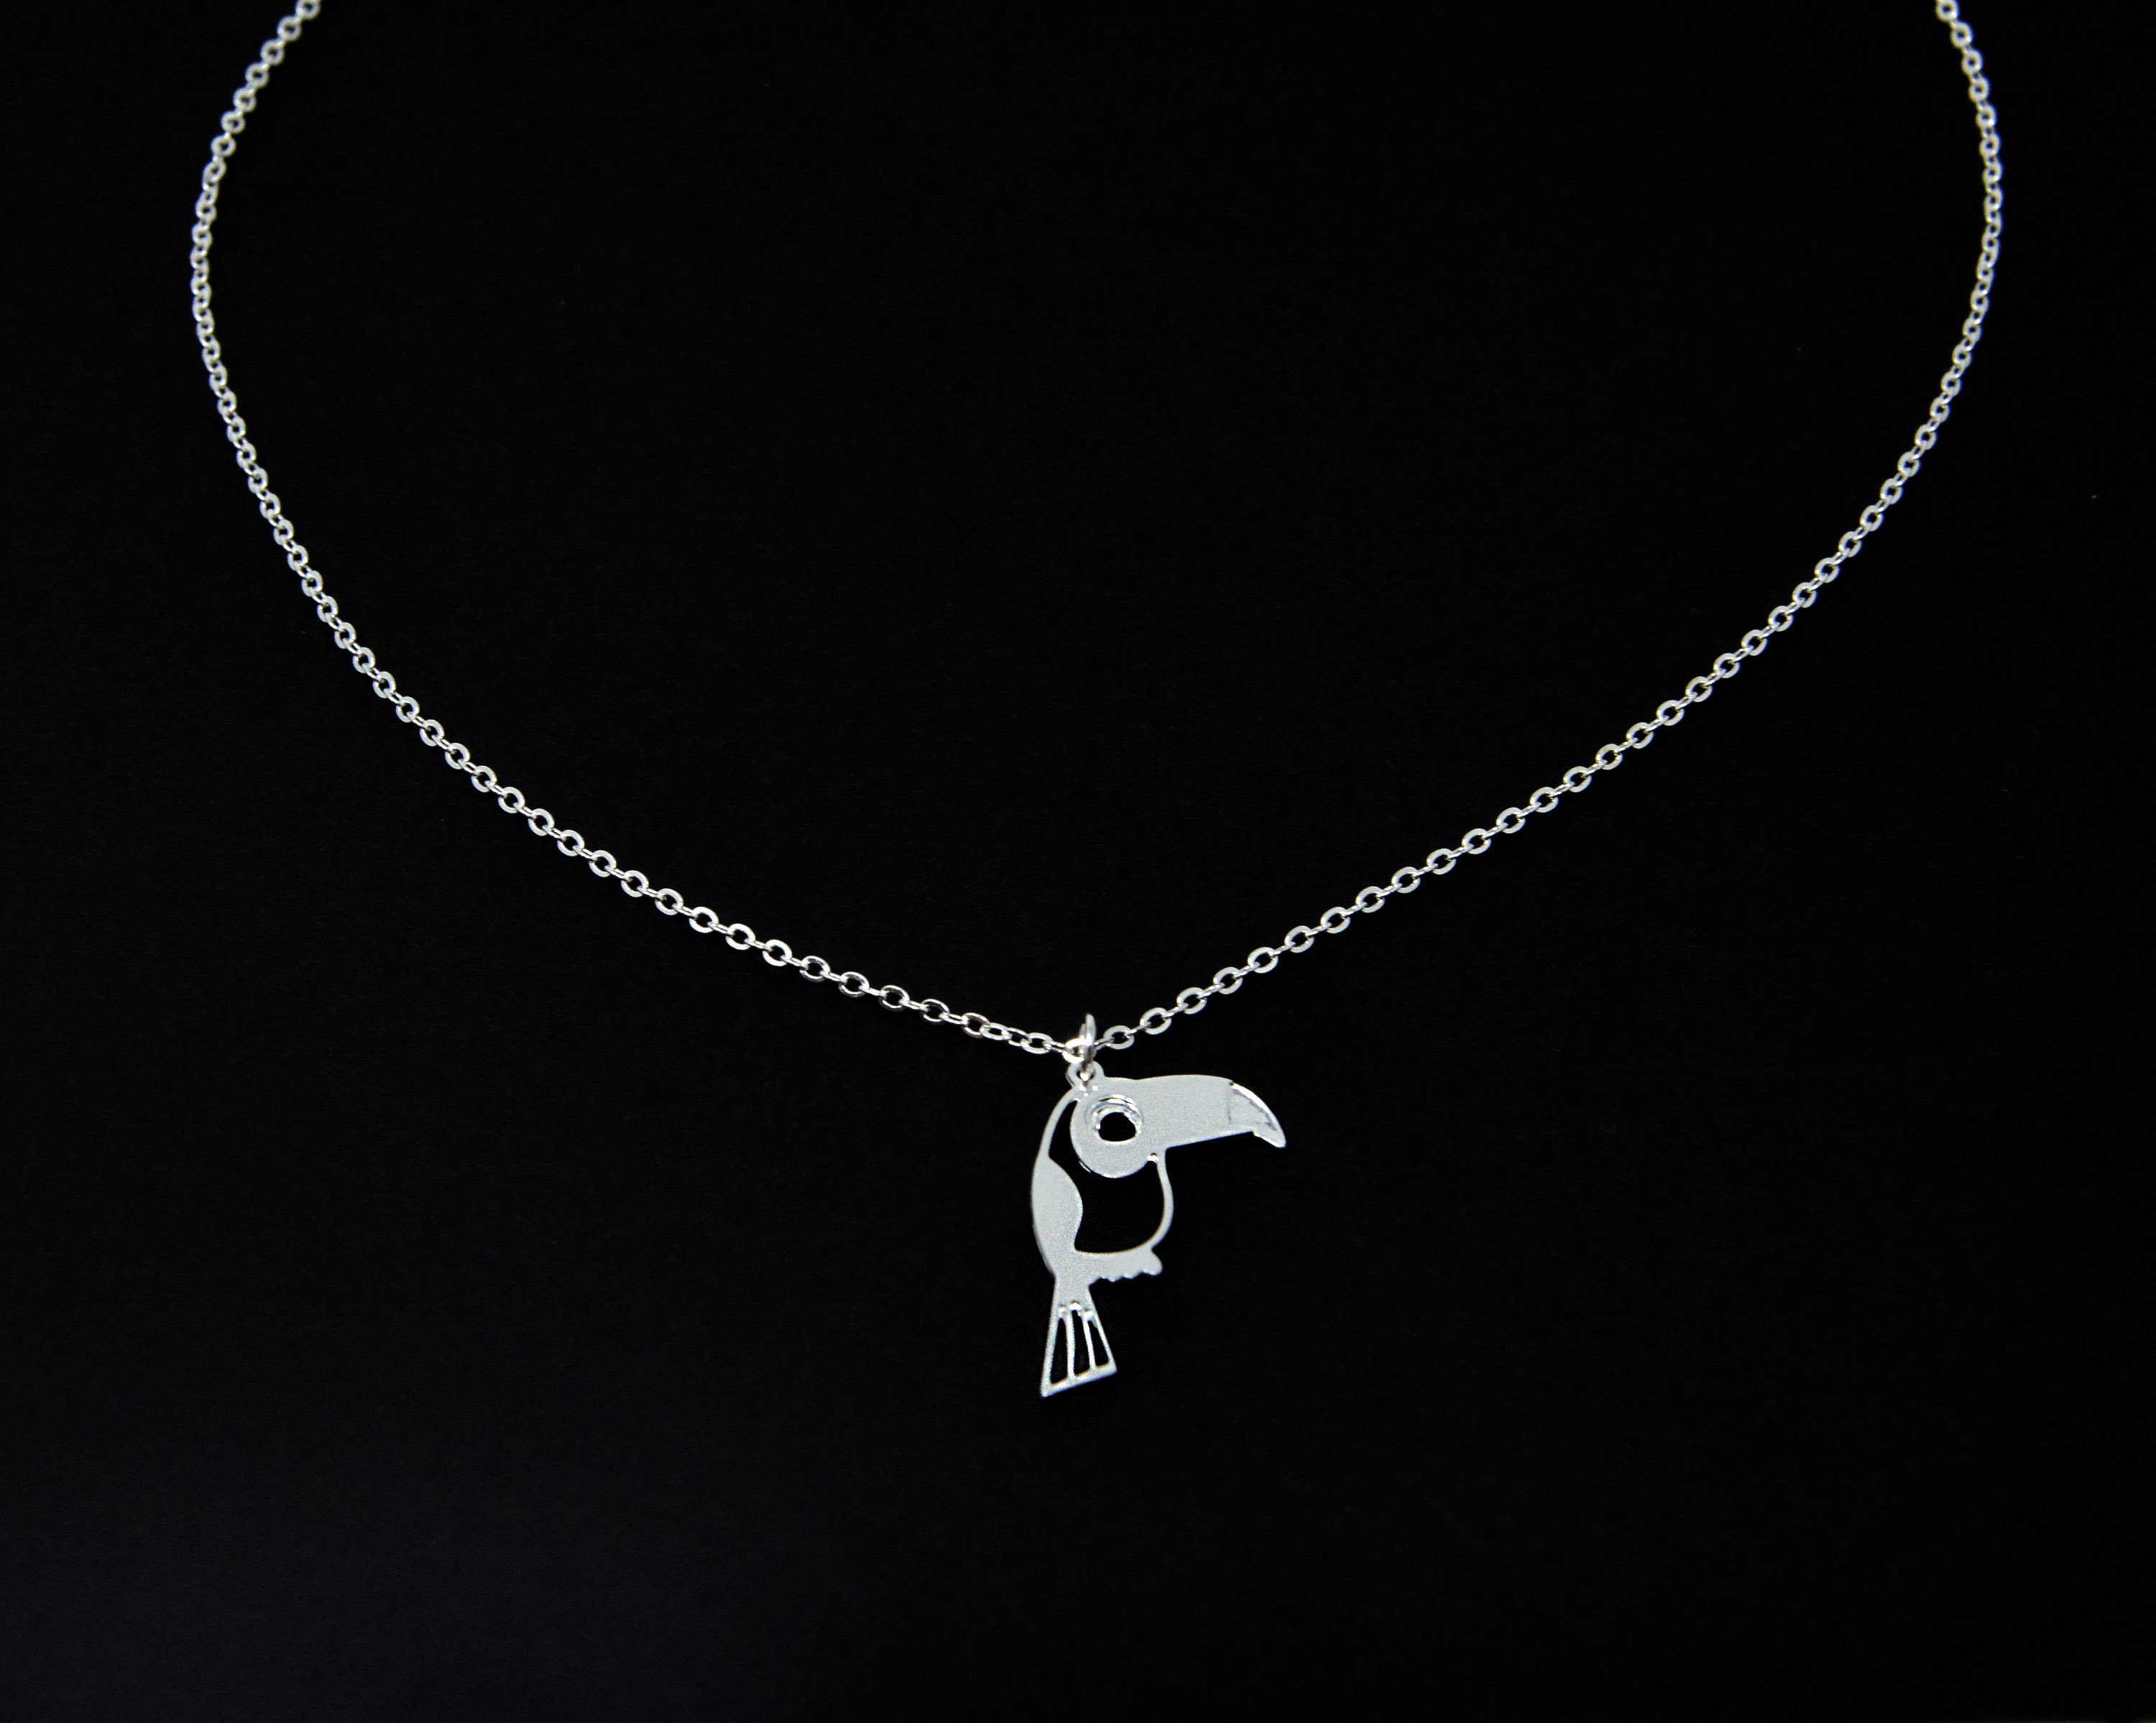  Toucan necklace, toucan charm, bird necklace, bird charm,  personalized necklace, initial necklace, monogram, initial charm : Handmade  Products